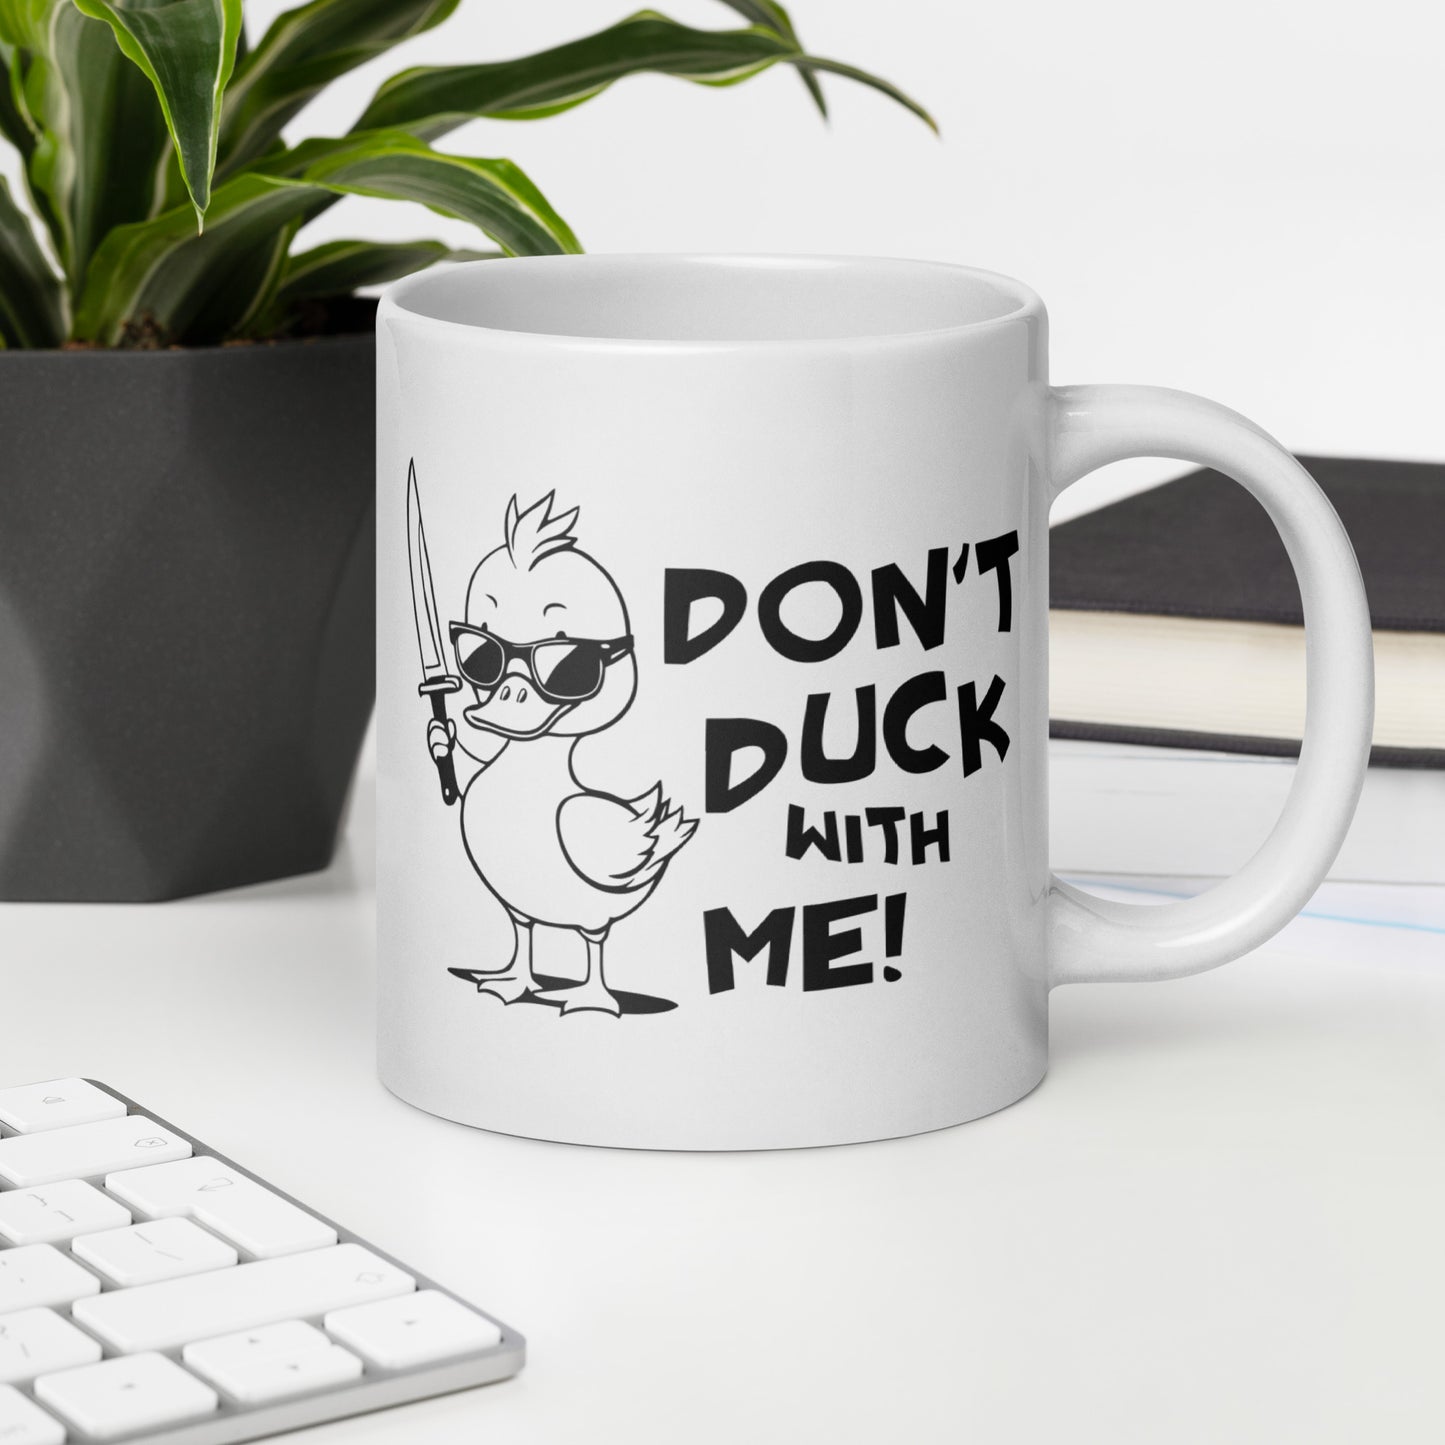 Don't Duck with Me Funny Ceramic Coffee Mug